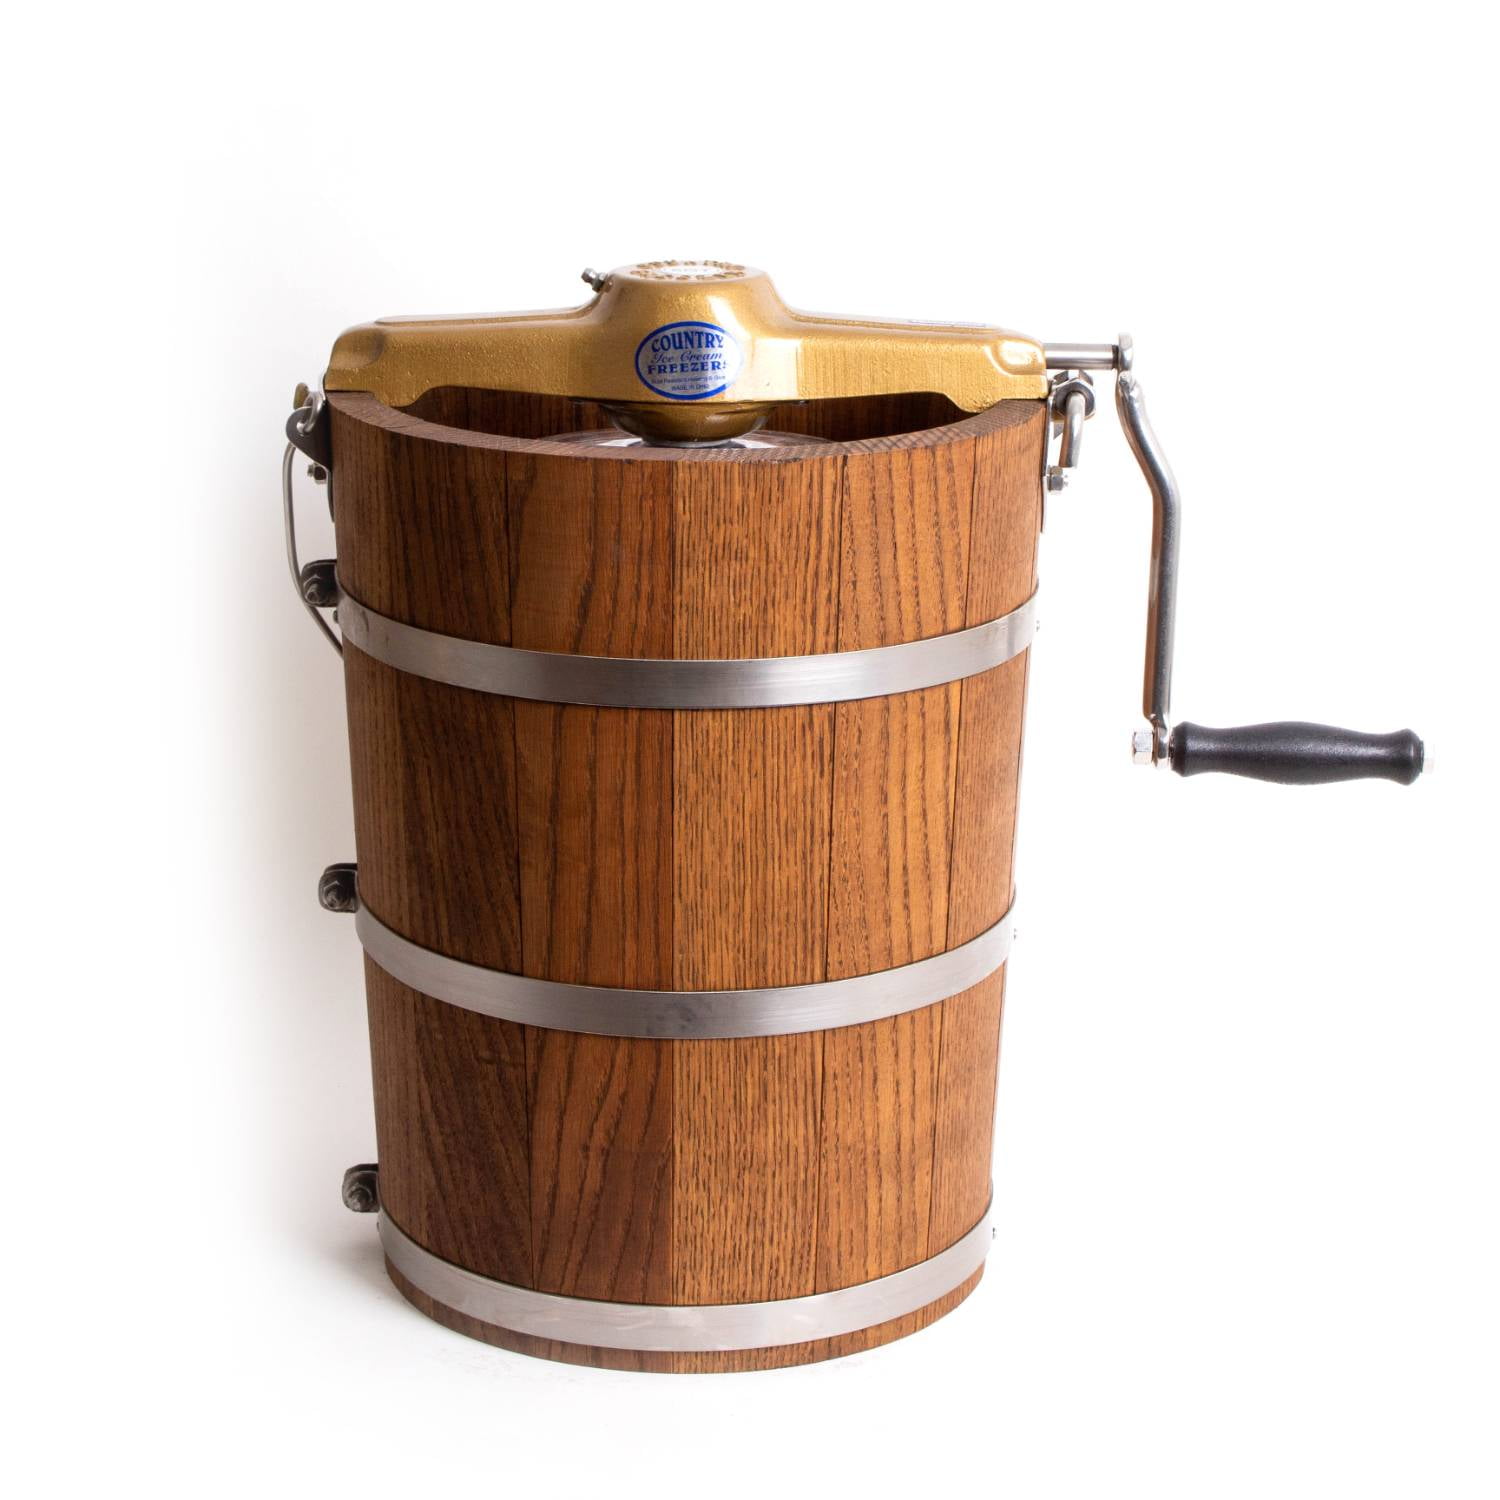 Lehman's Manual Ice Cream Maker - Make Your Own Homemade Ice Cream, Hand Crank with Stainless Steel Can and Oak Tub, 4 Quart Capacity